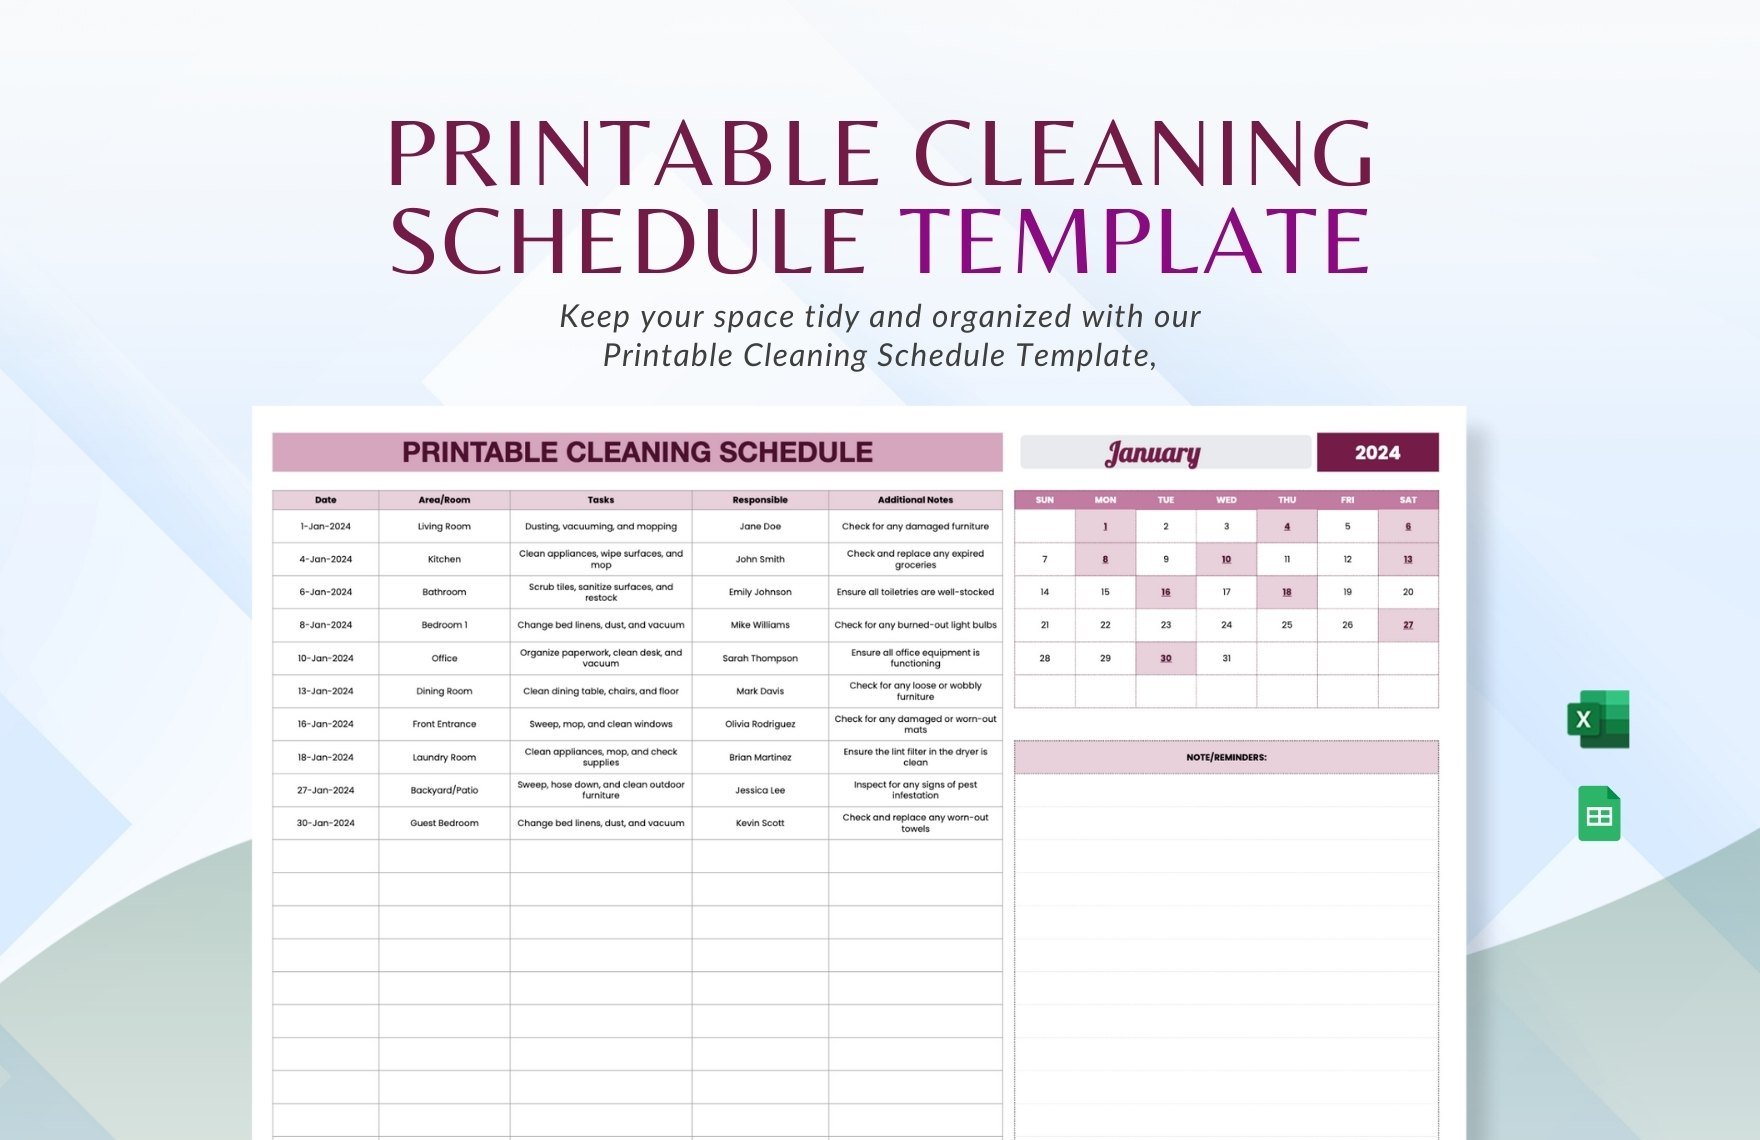 Printable Cleaning Schedule Template in Excel, Google Sheets